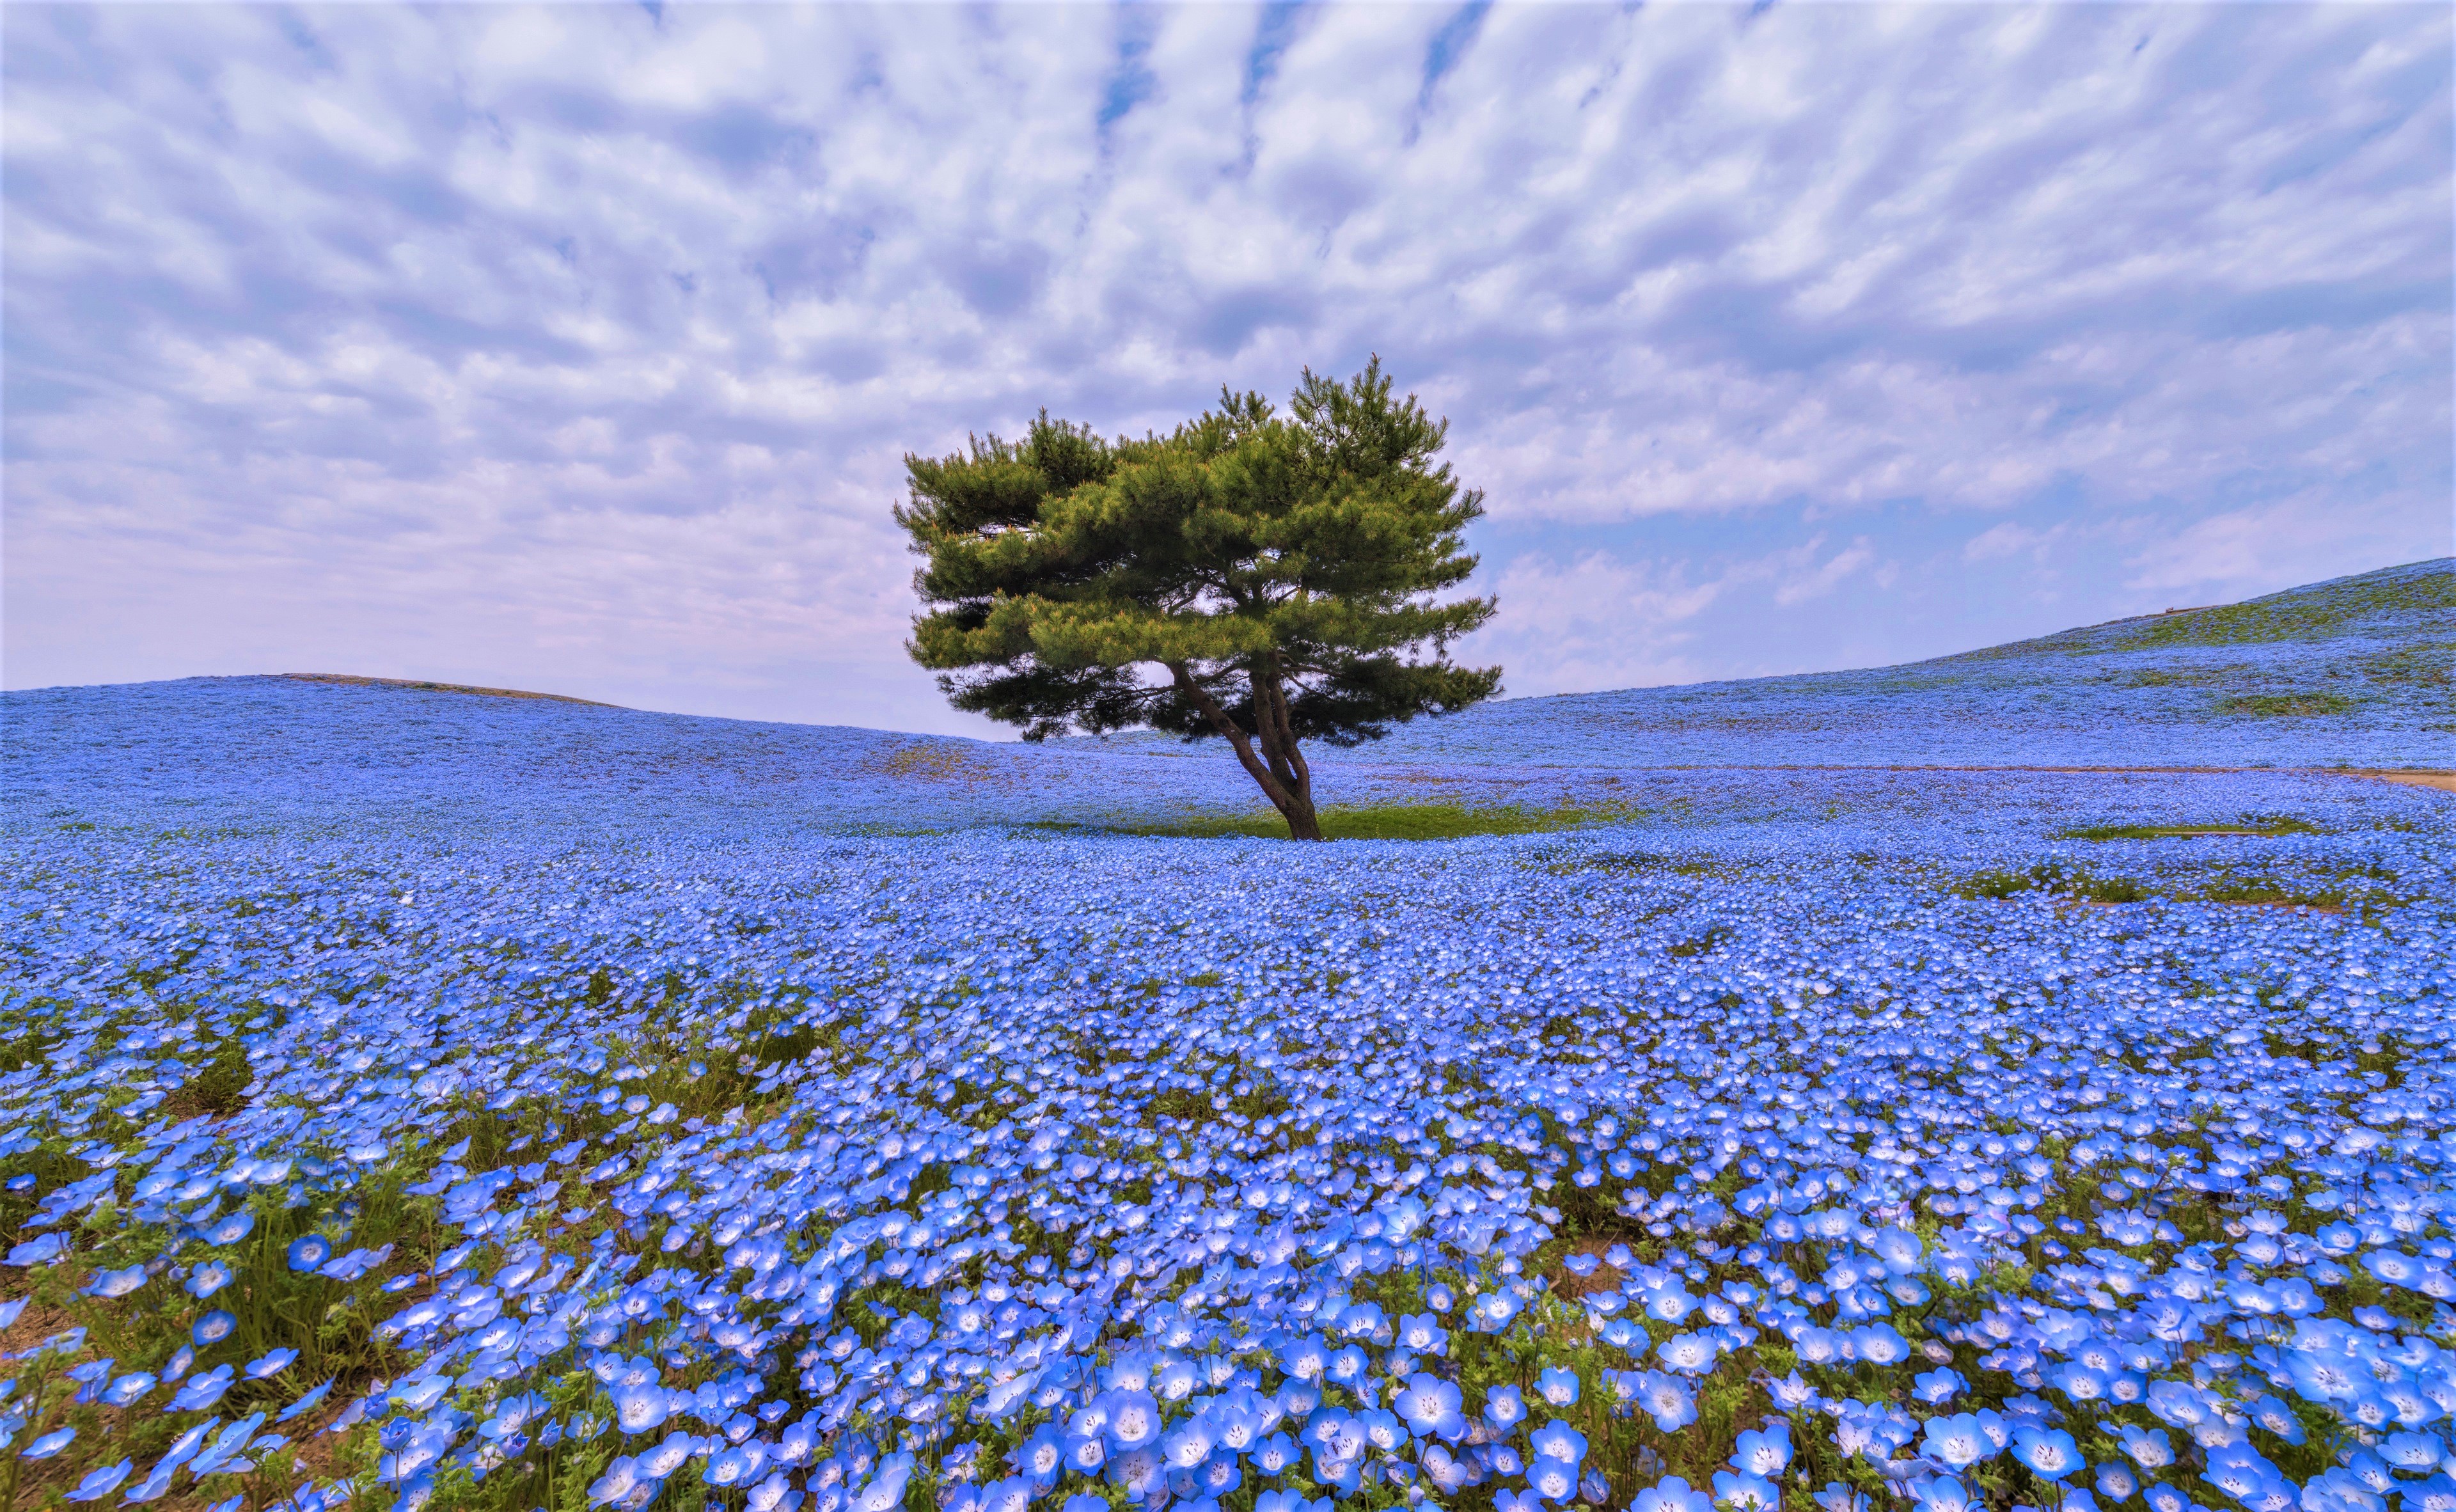 339 Blue Flower HD Wallpapers | Background Images - Wallpaper Abyss